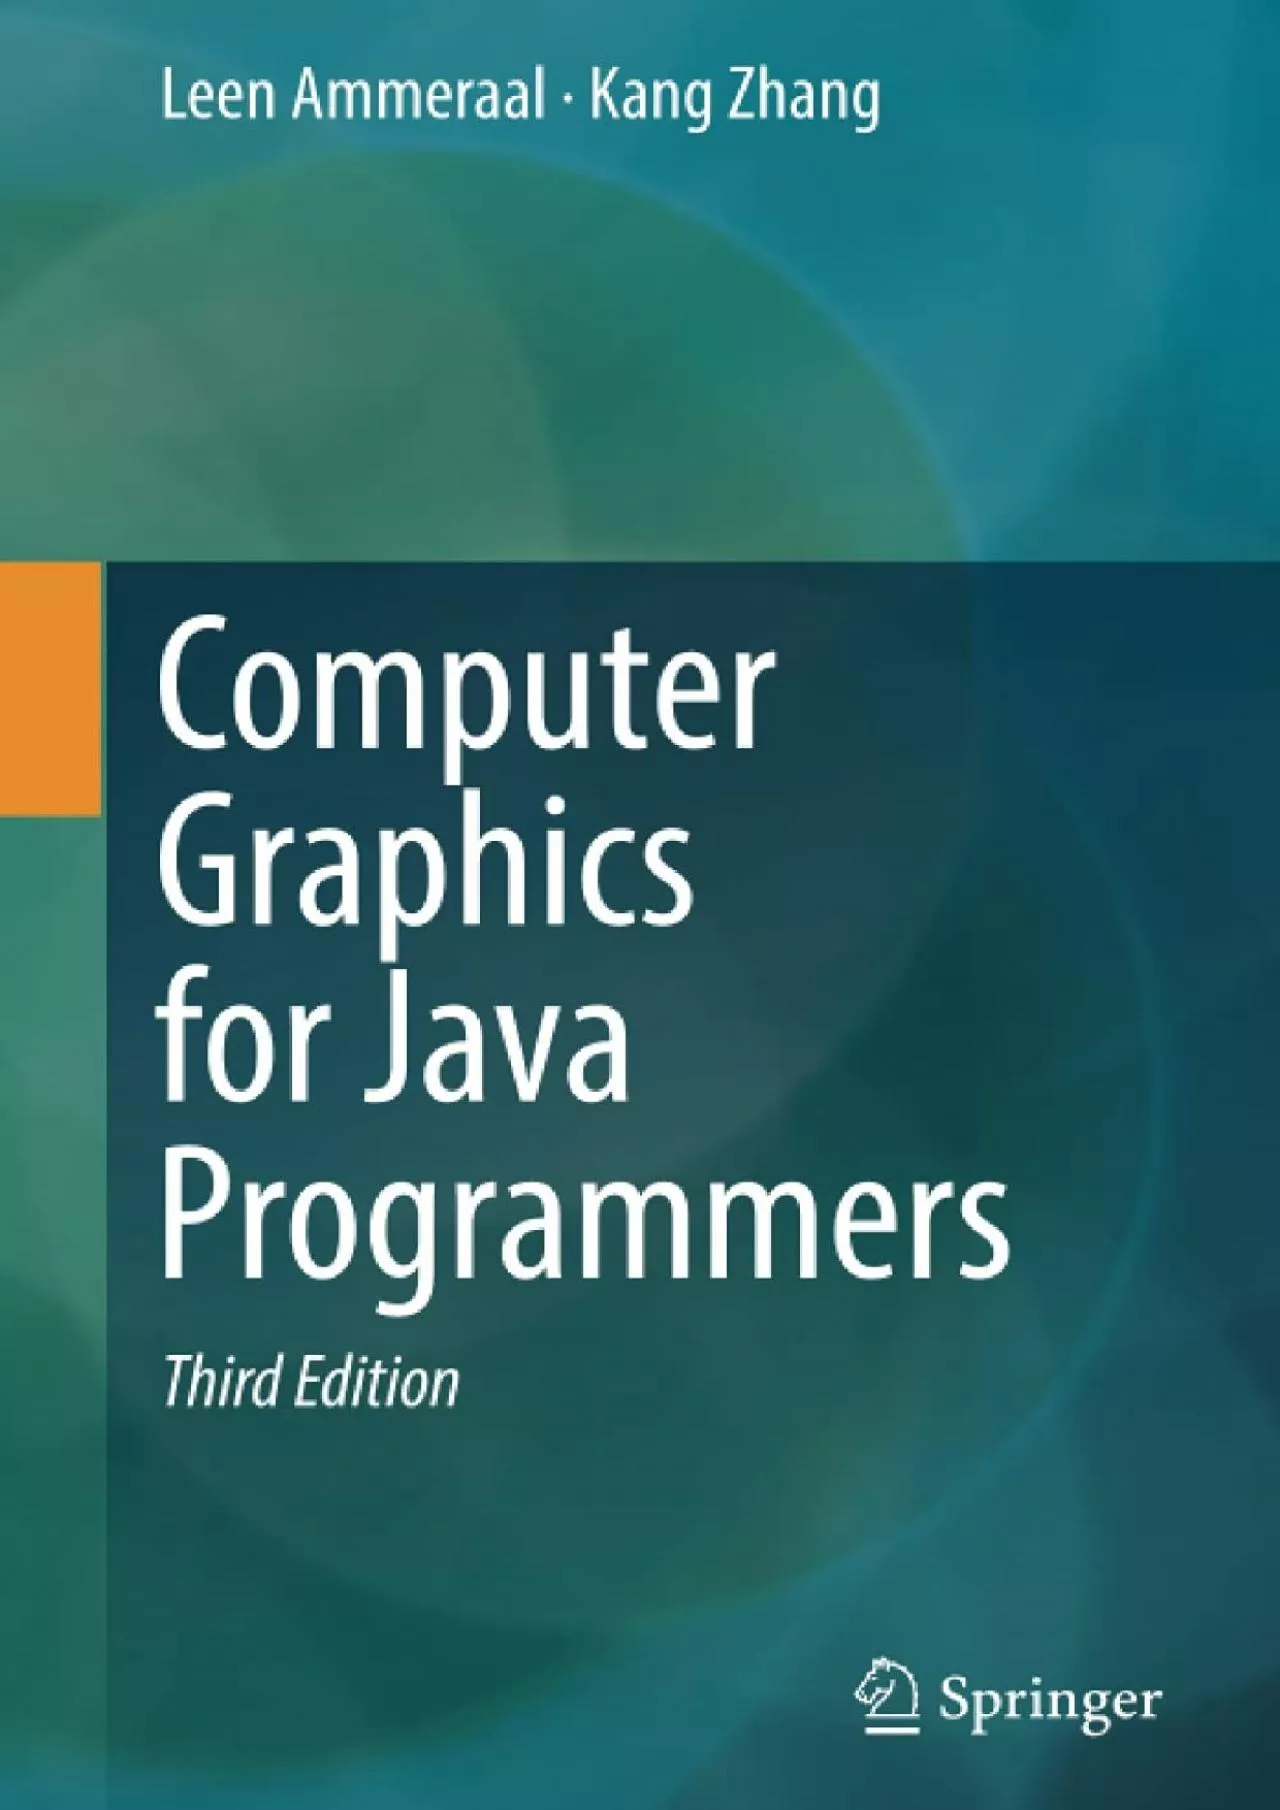 [DOWLOAD]-Computer Graphics for Java Programmers